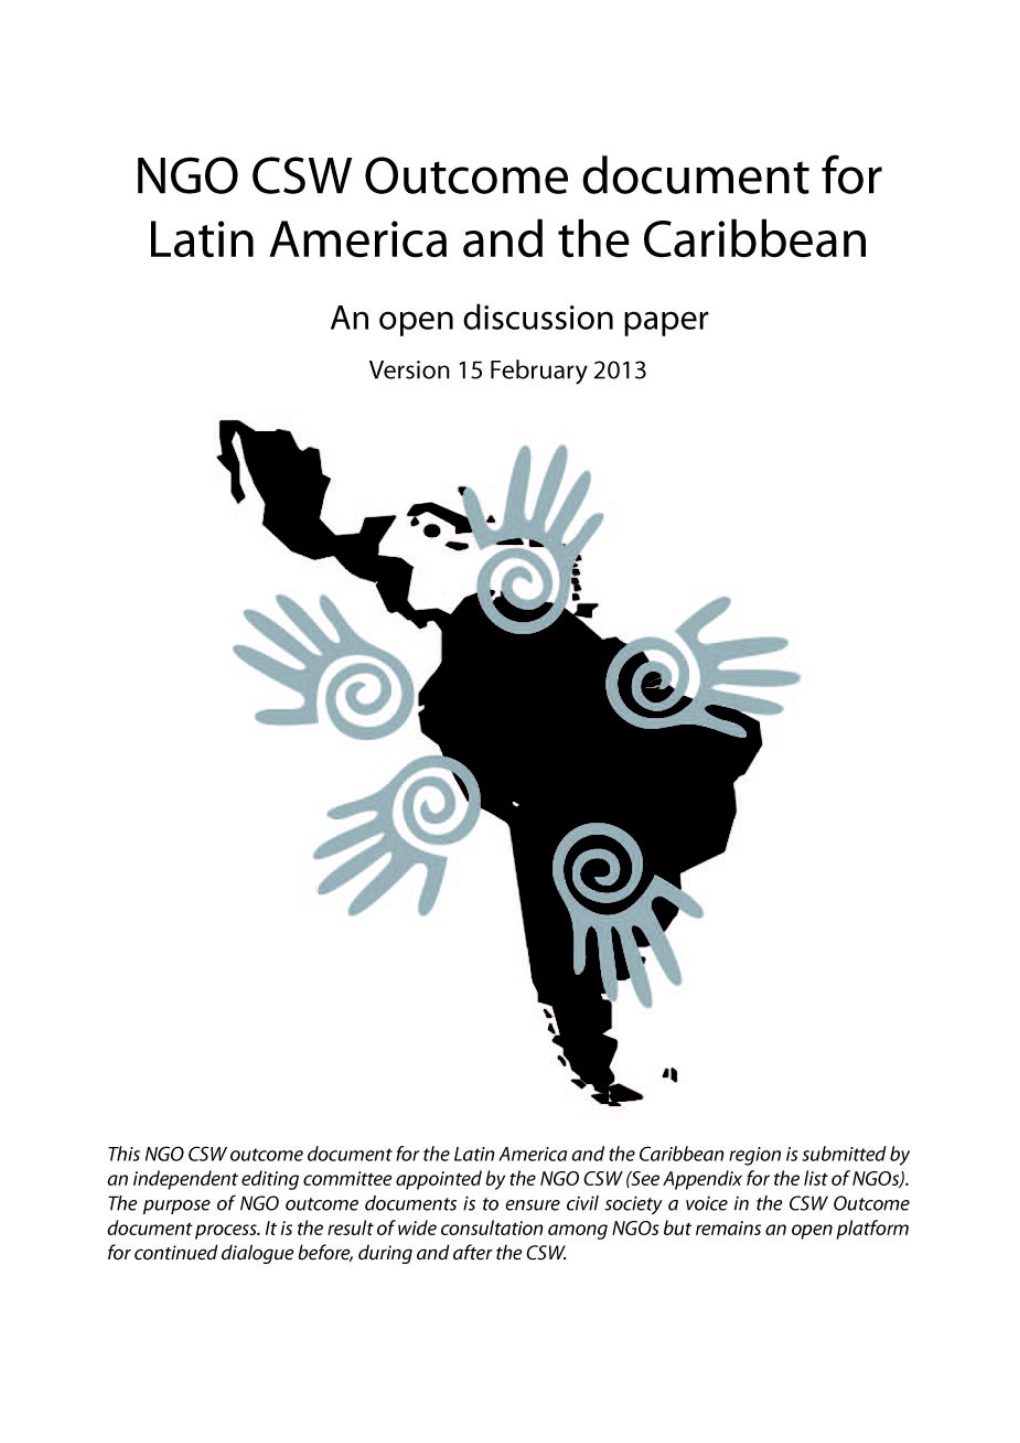 NGO CSW Outcome Document for Latin America and the Caribbean an Open Discussion Paper